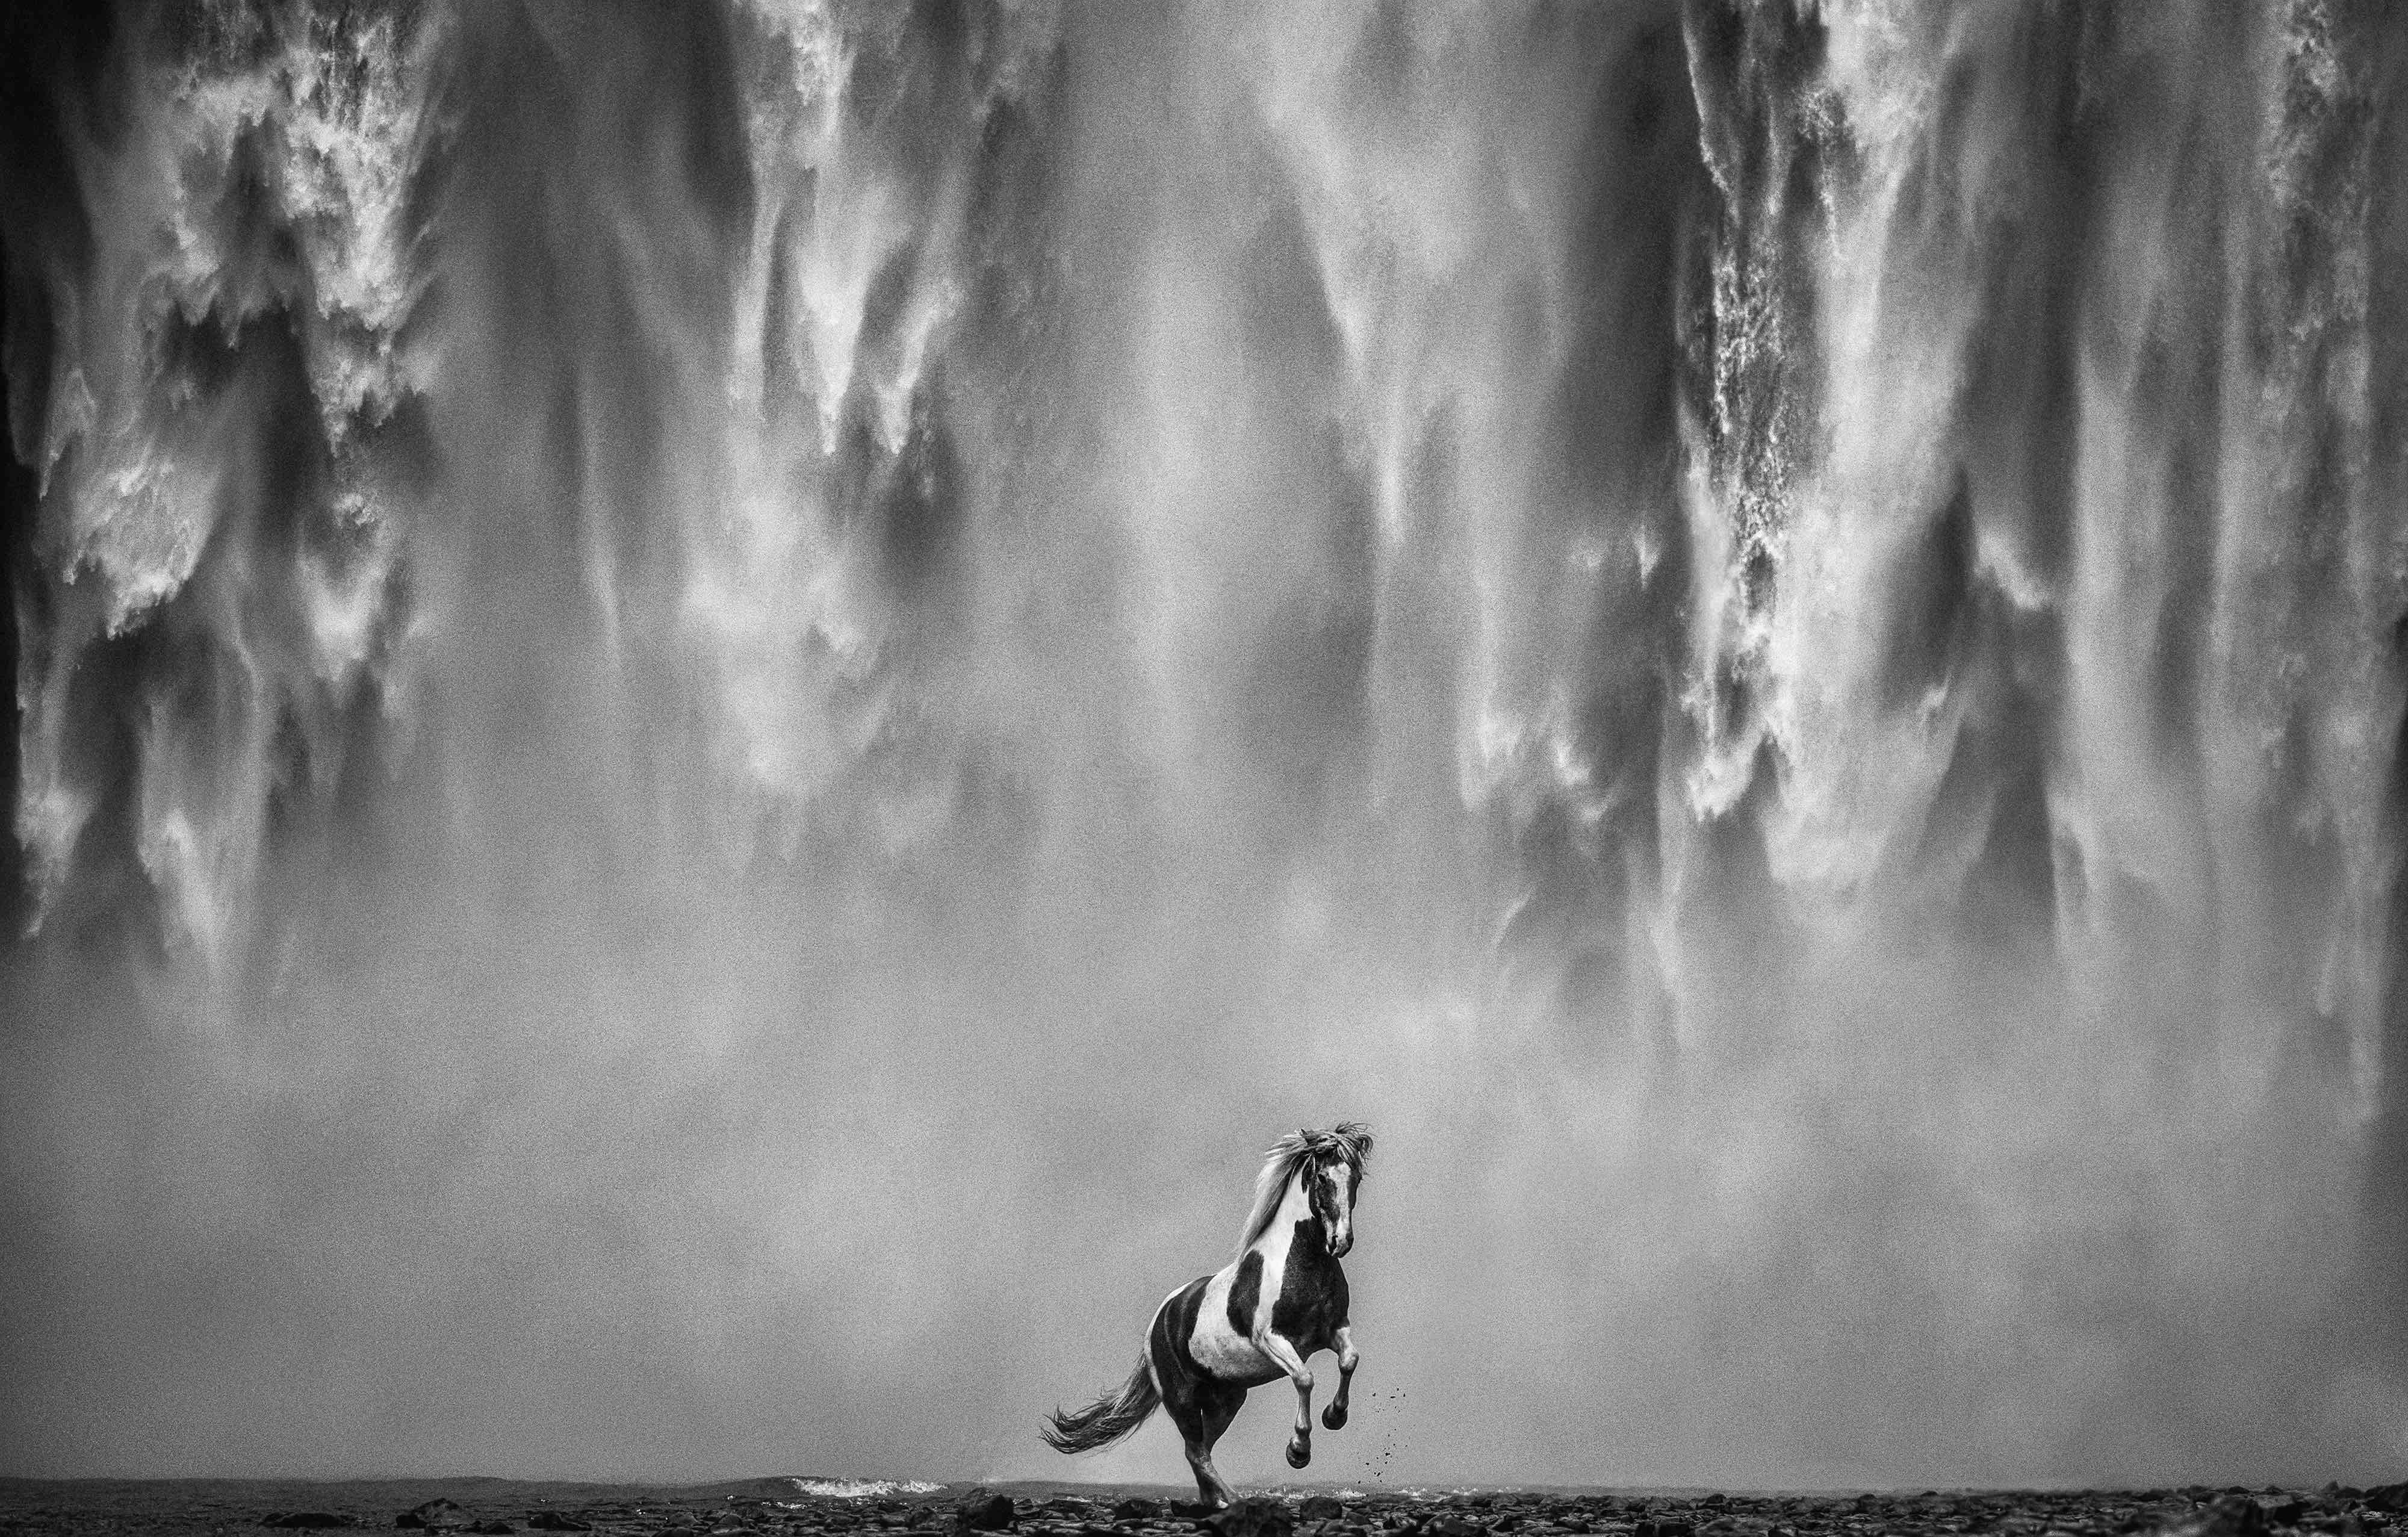 David Yarrow Black and White Photograph - Legends of the Fall